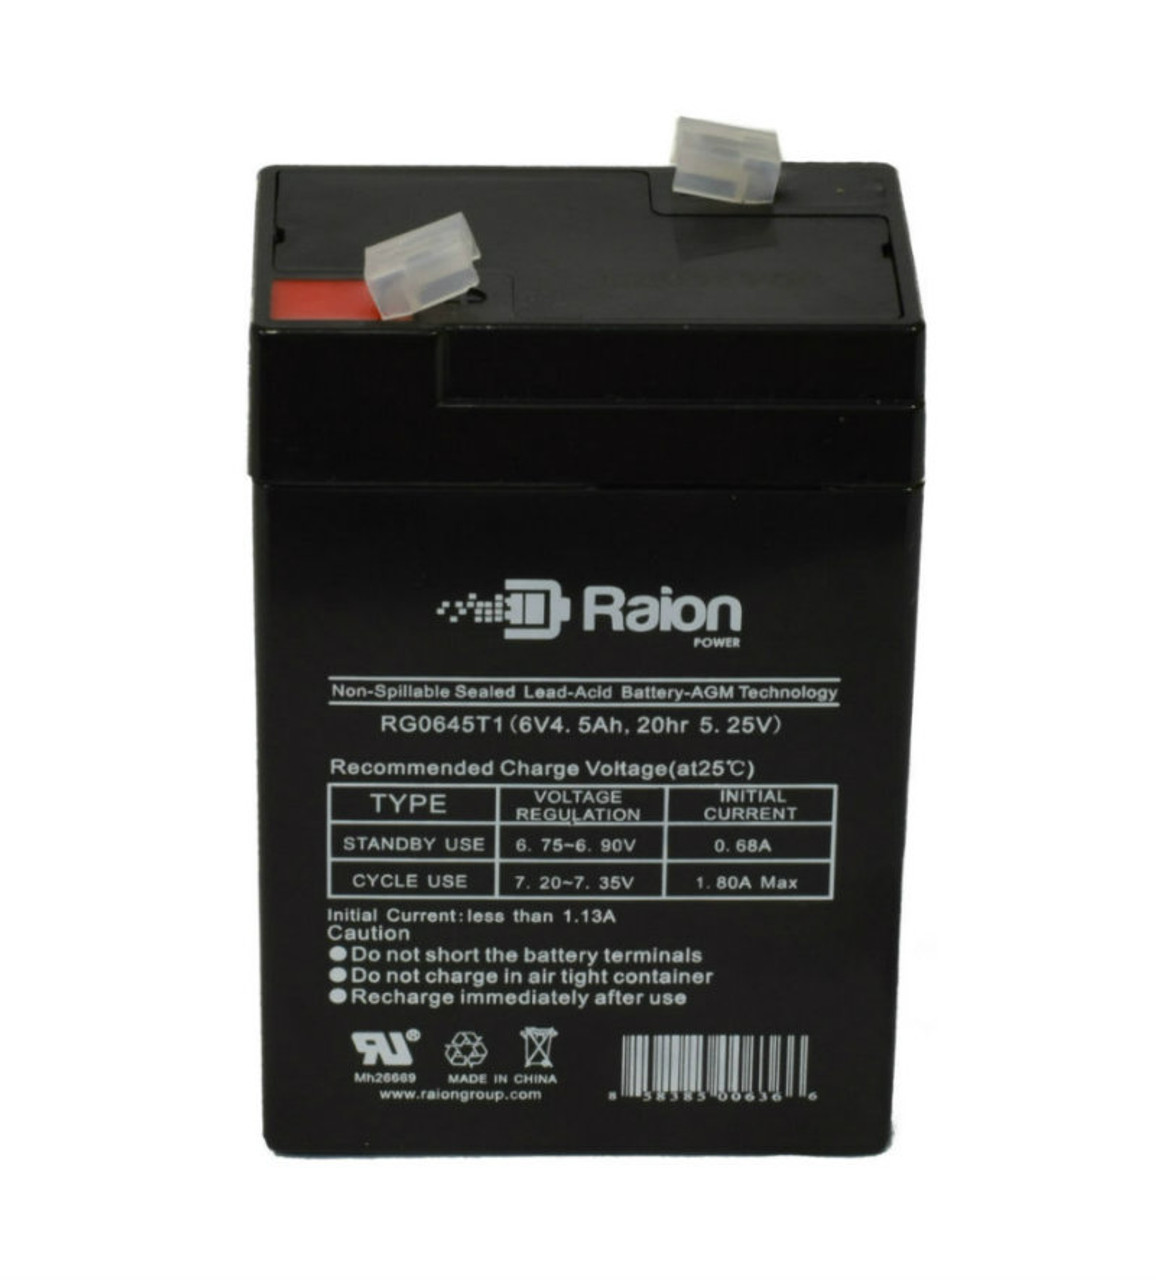 Raion Power RG0645T1 Replacement Battery Cartridge for FirstPower FP640A